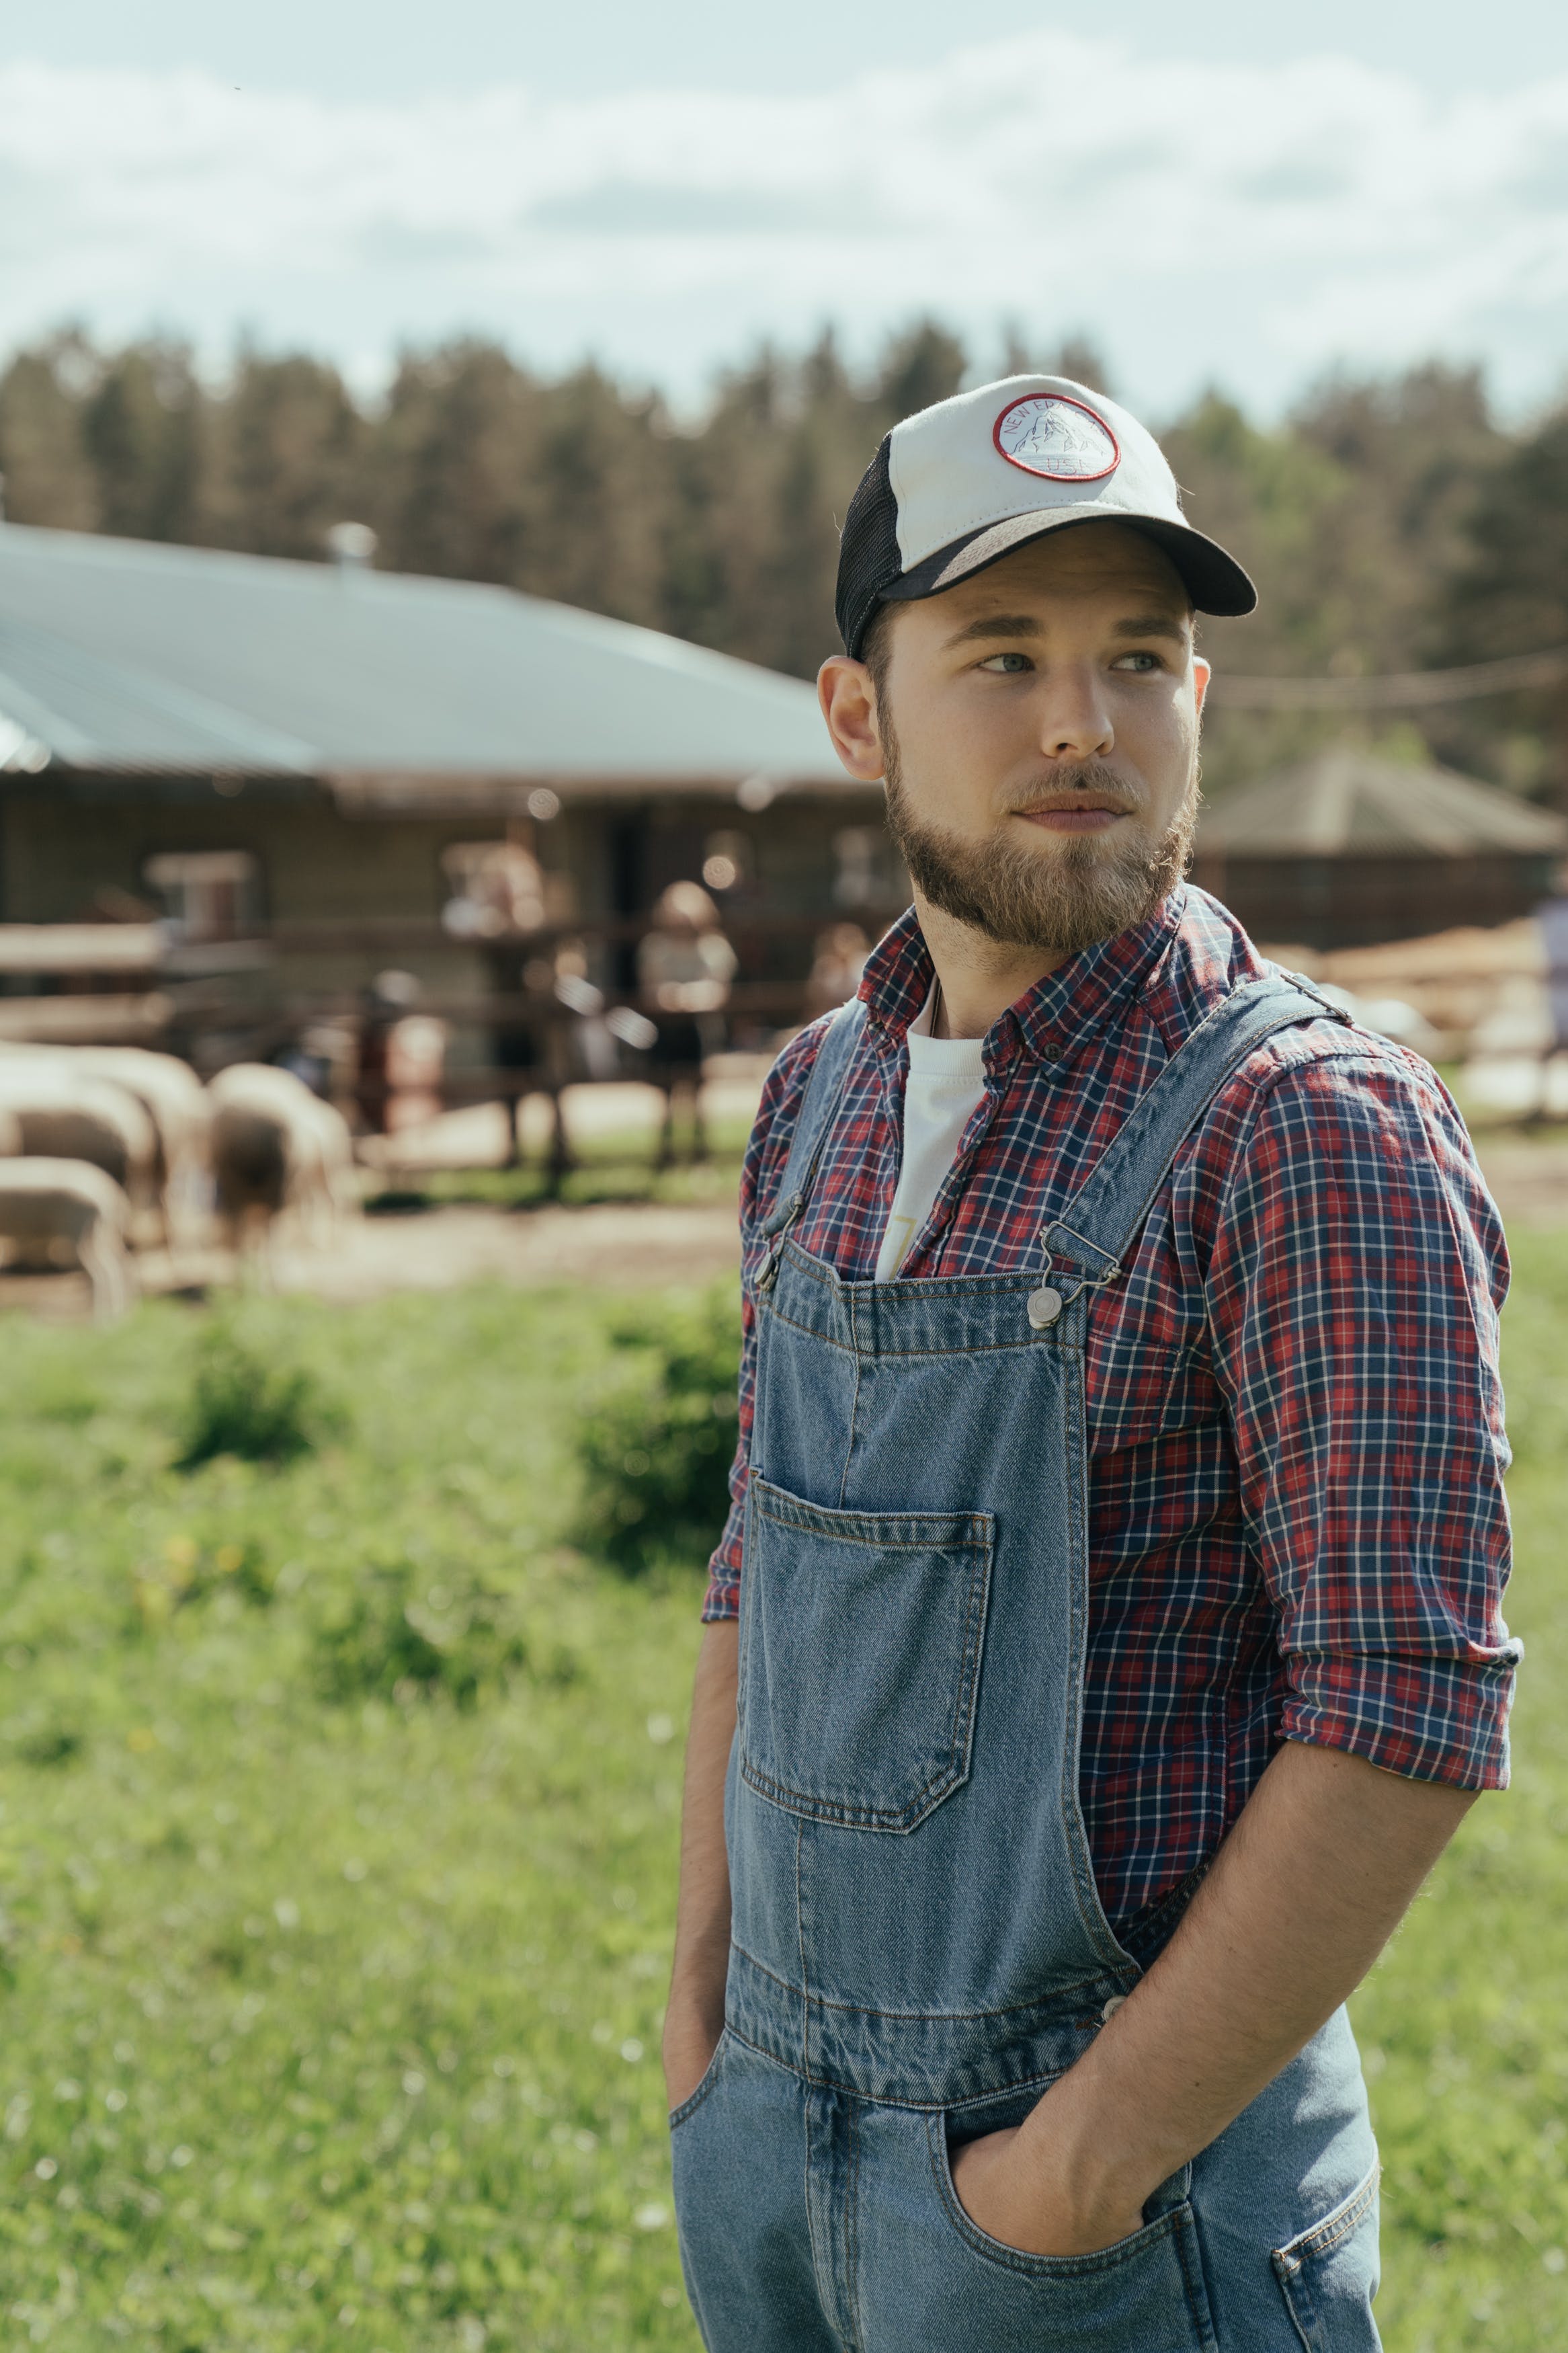 A young farmer dressed in work clothes | Source: Pexels